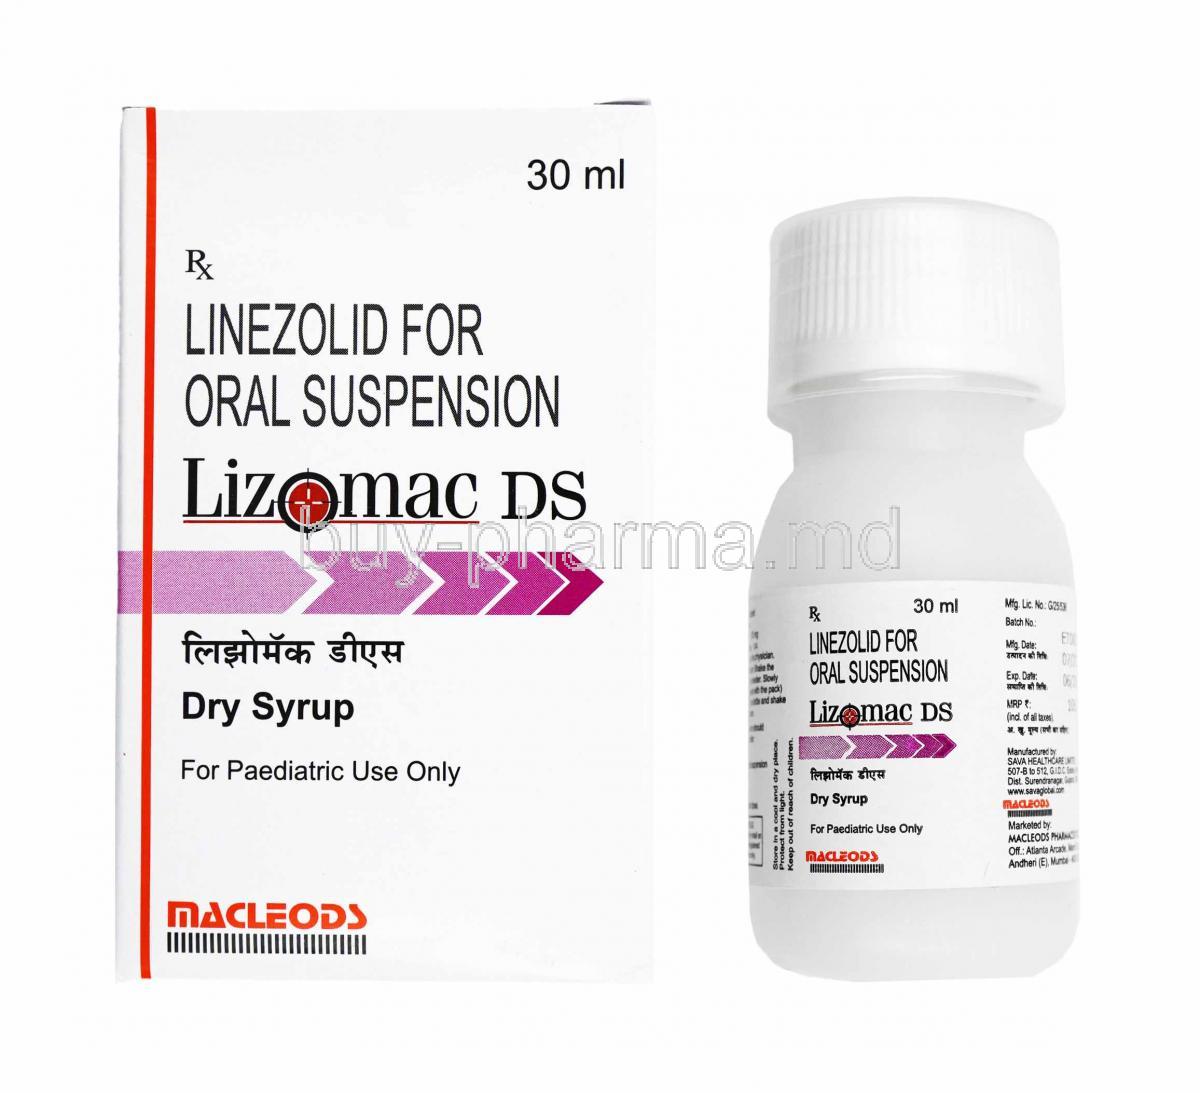 Lizomac DS Dry Syrup, Linezolid box and bottle